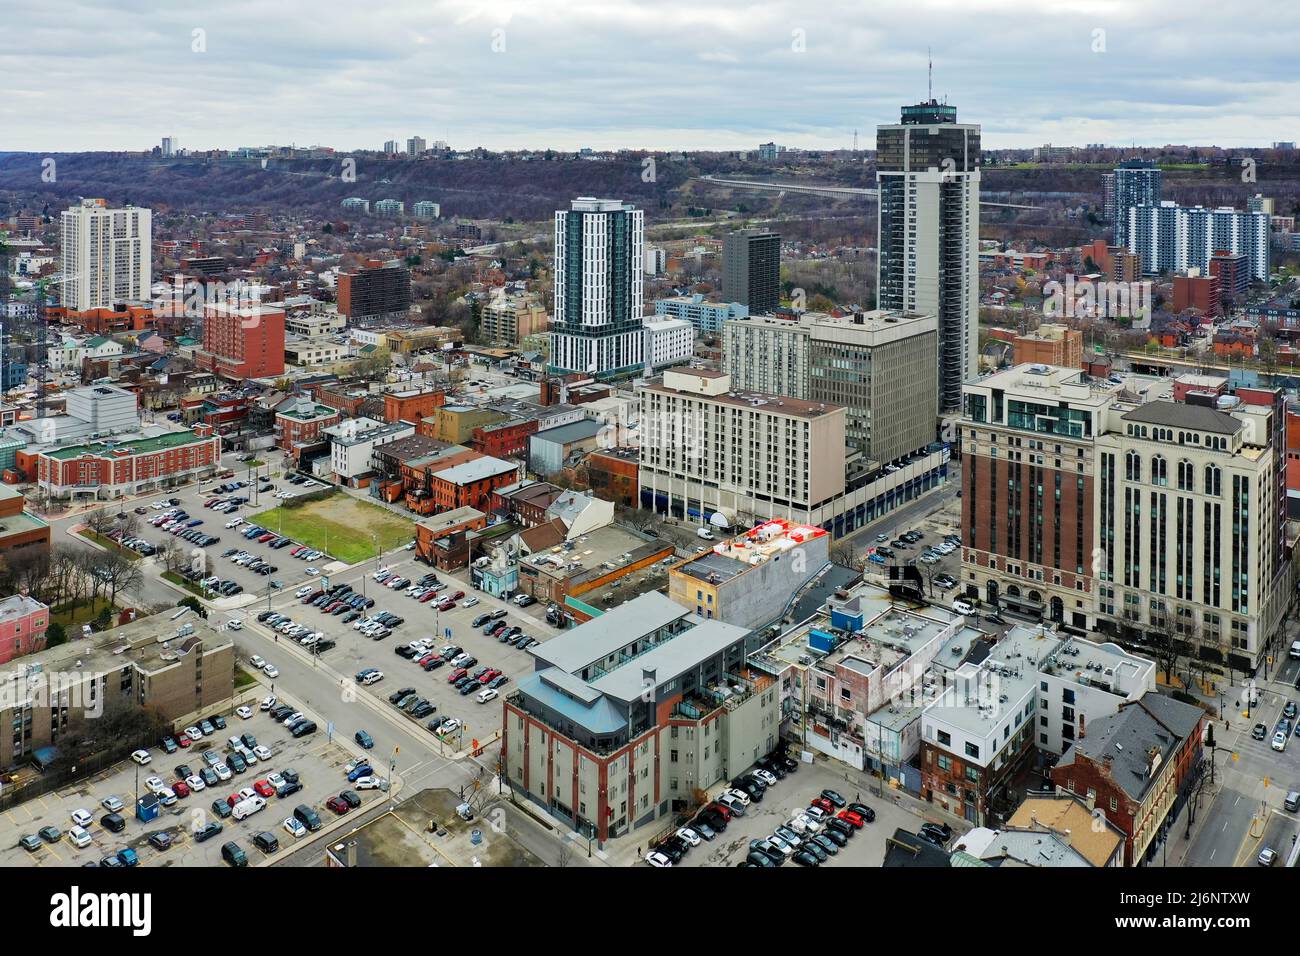 An aerial view of Hamilton, Ontario, Canada downtown in late fall Stock Photo